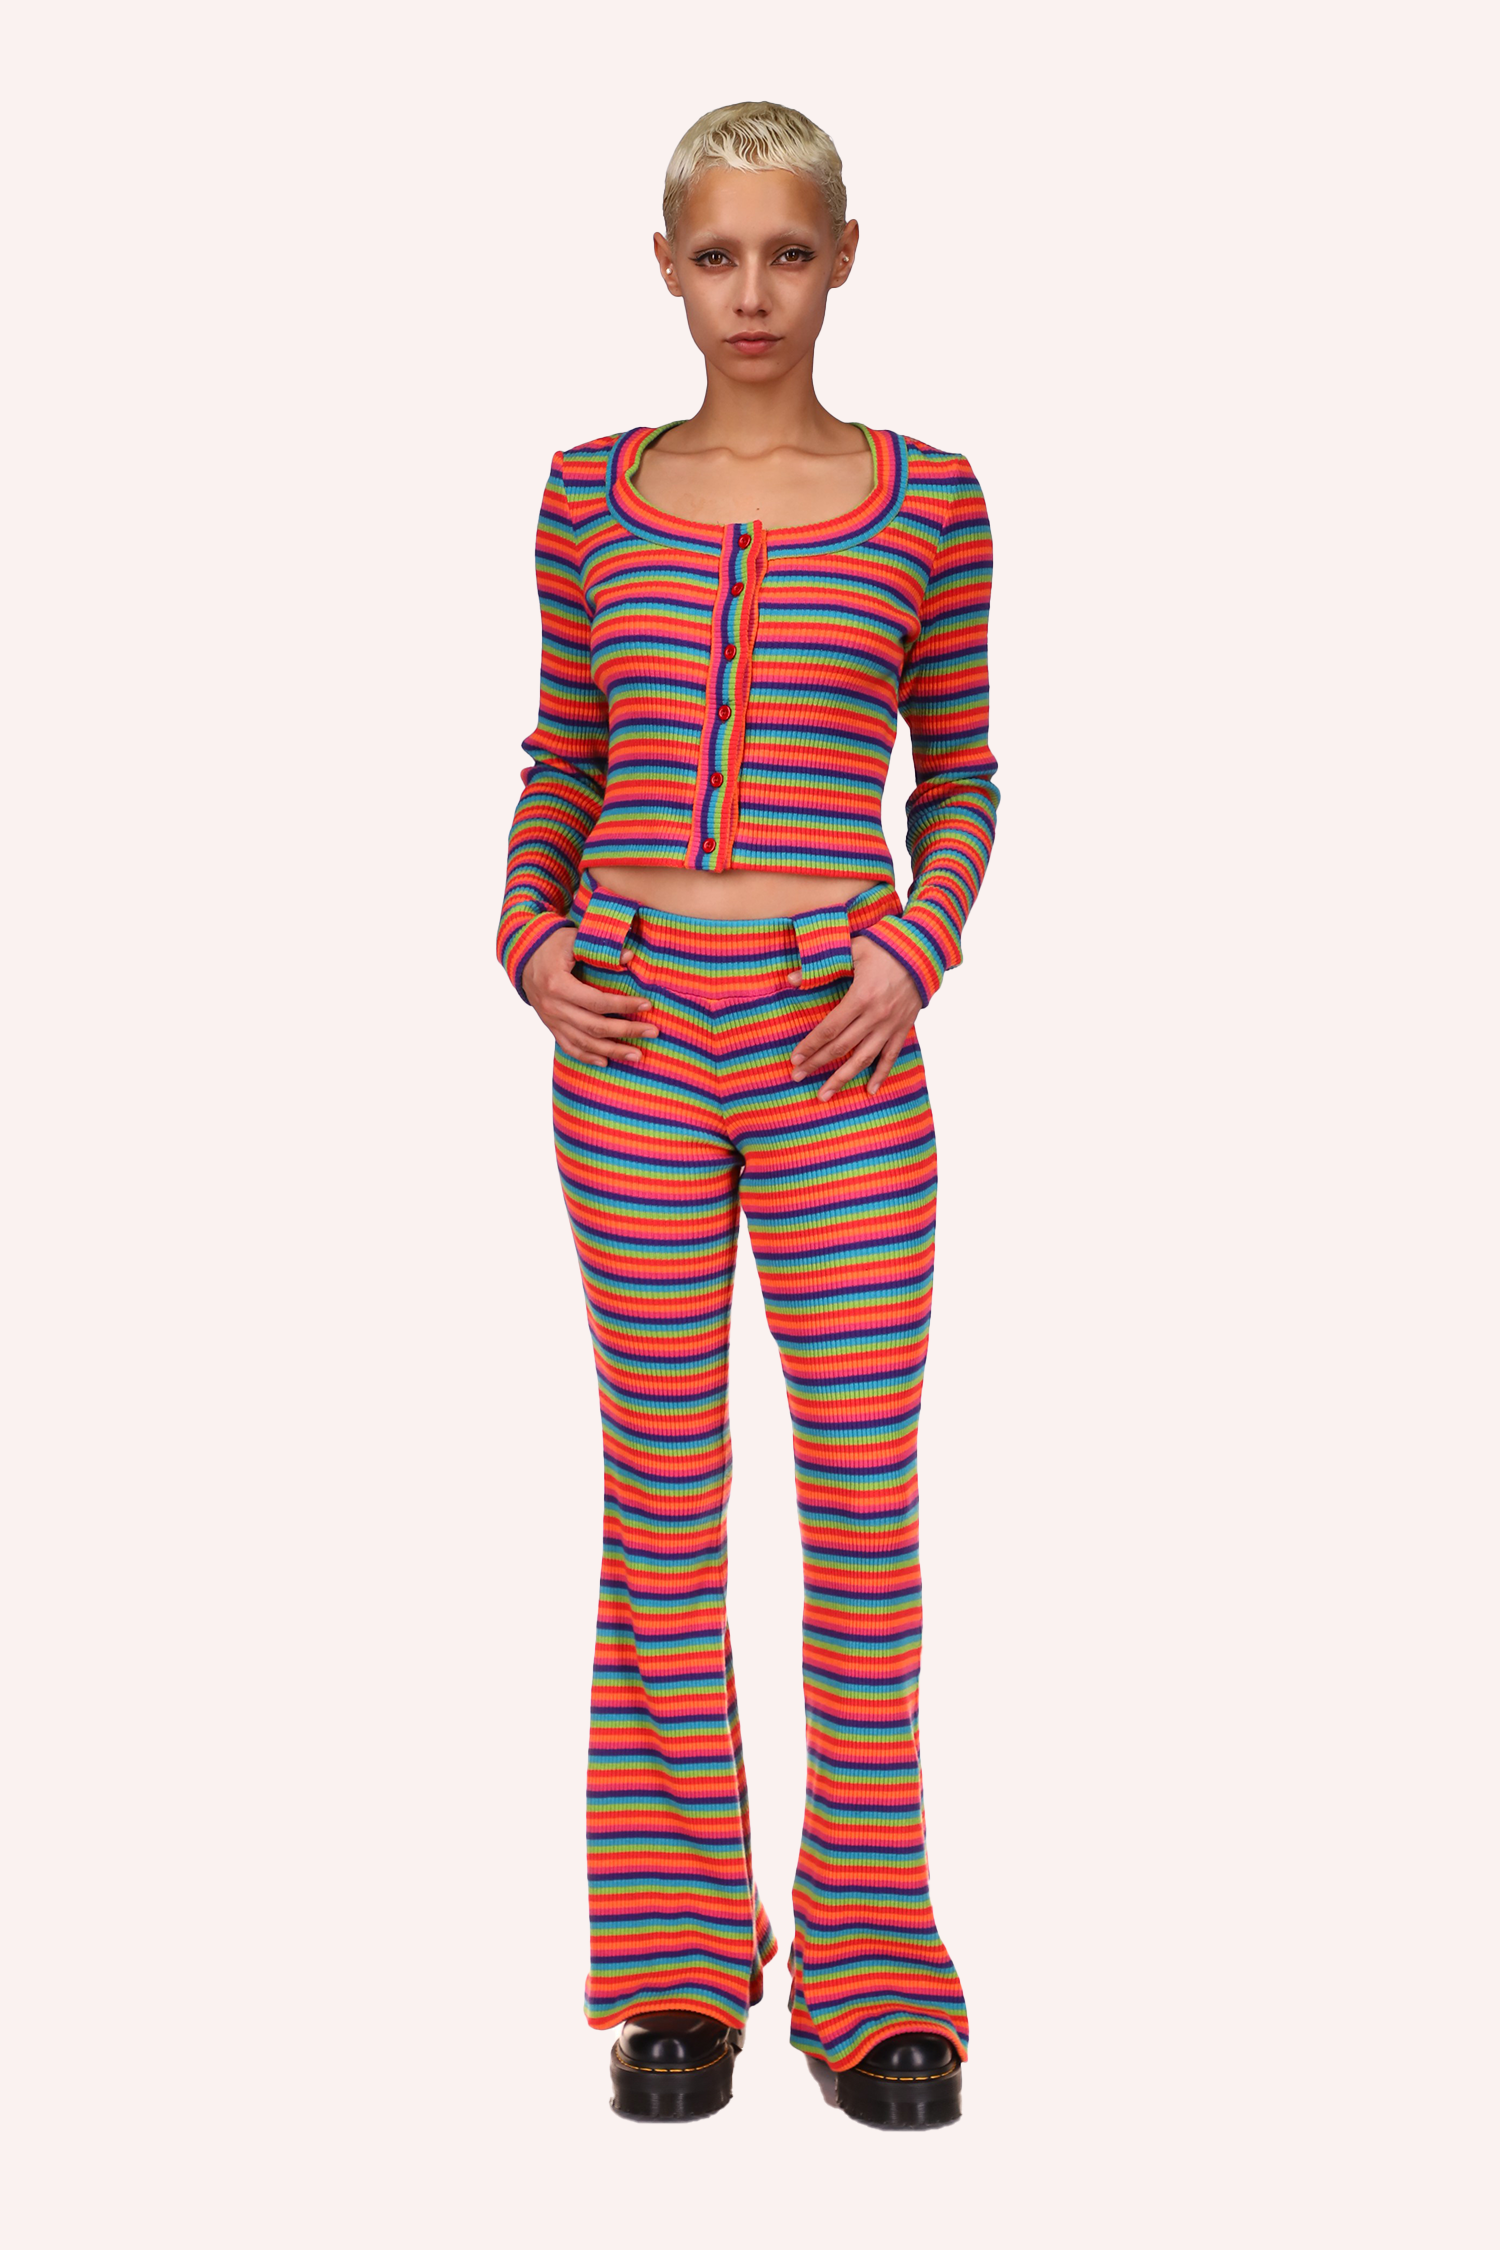 The rainbow-striped pants are a perfect choice to pair with the rainbow-striped sweater.